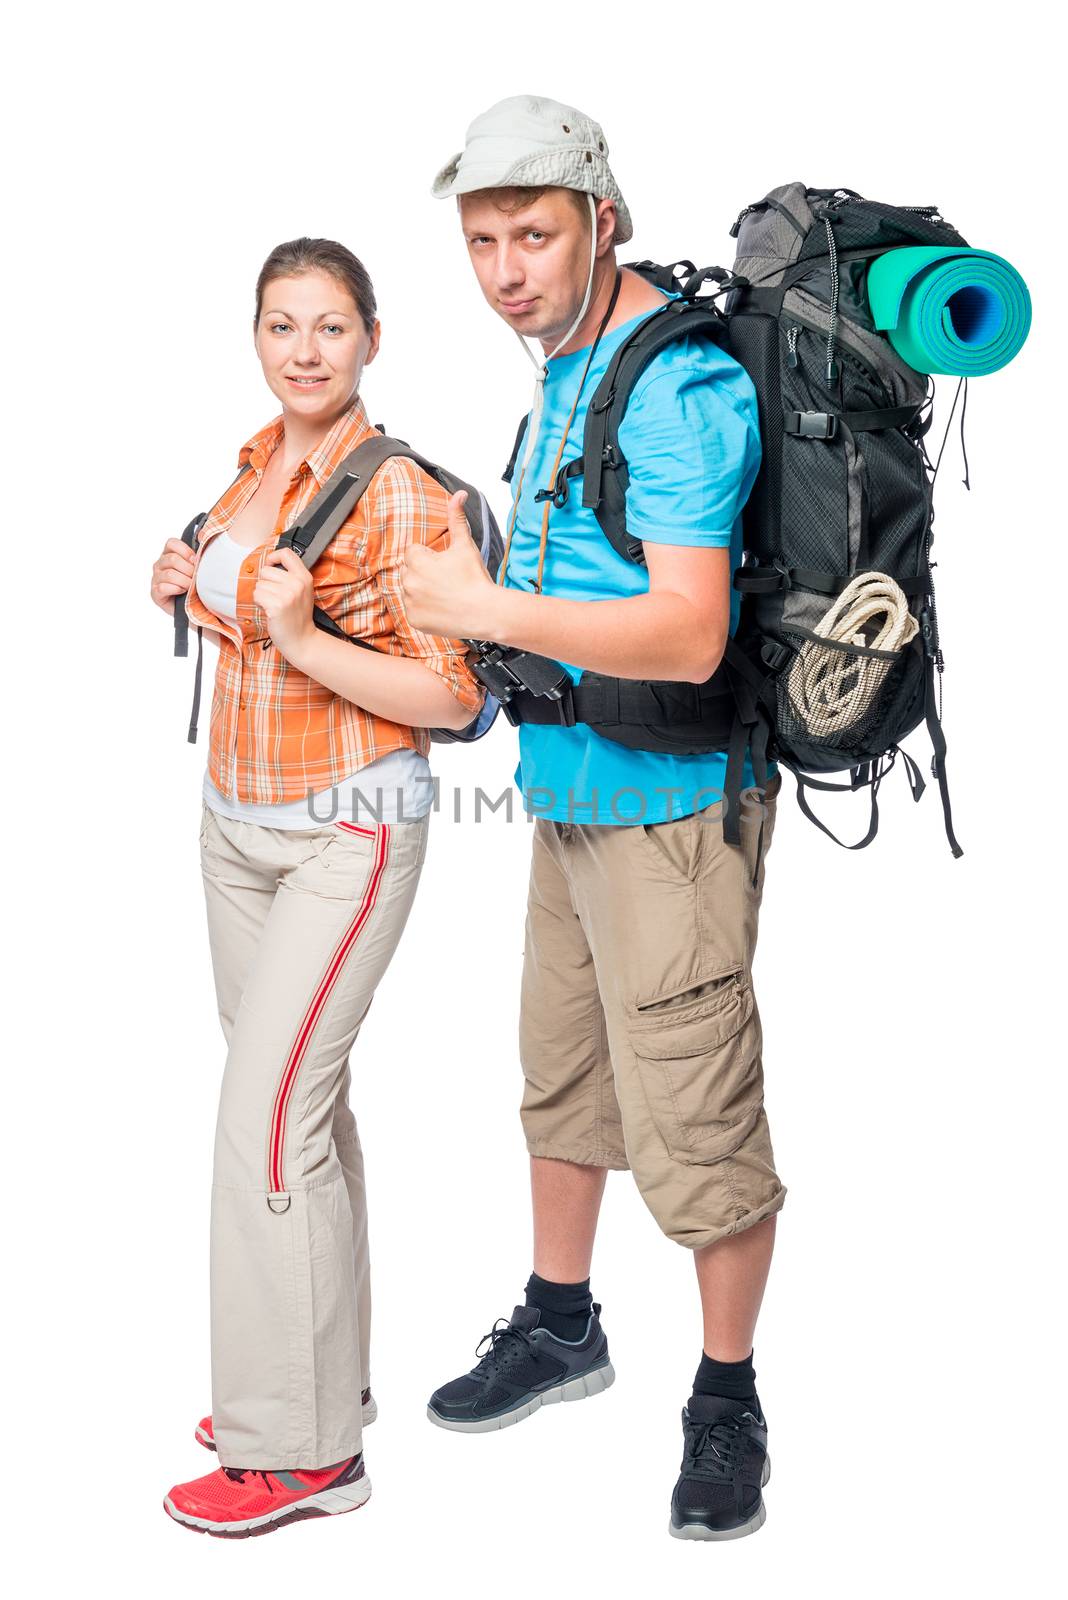 Tourist satisfaction with backpacks posing in the studio on a wh by kosmsos111